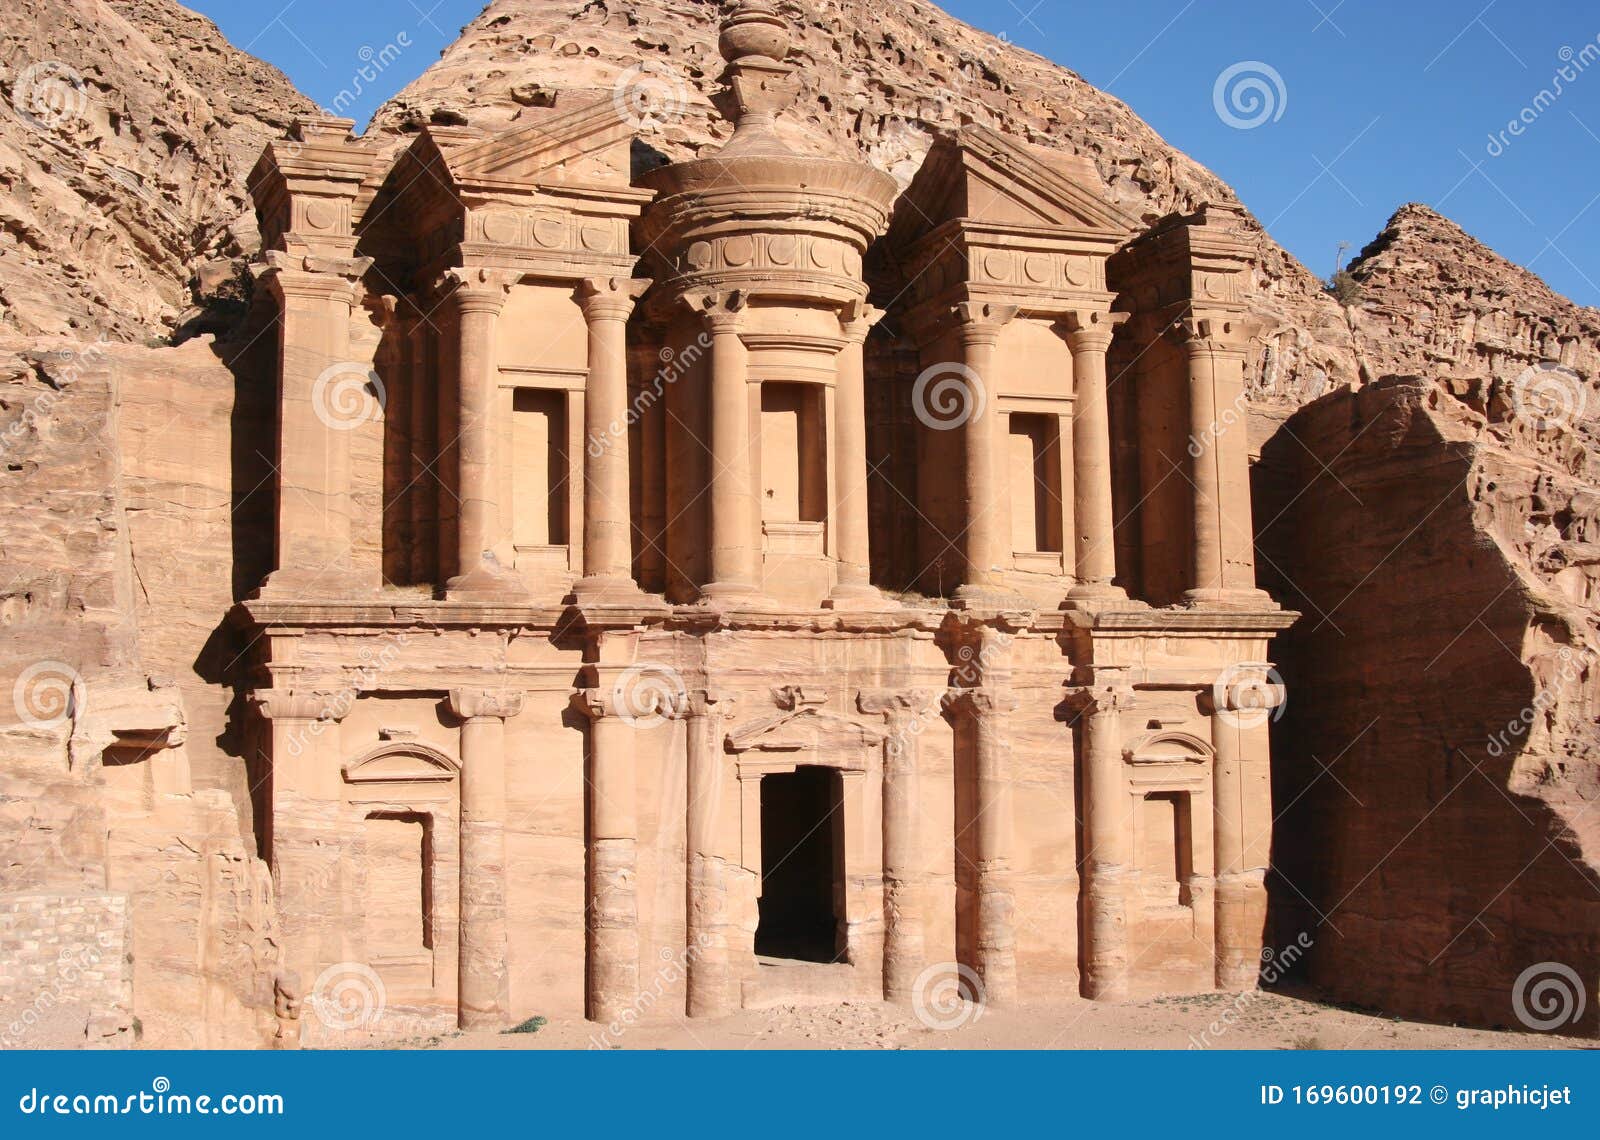 The Monastry, Holy Monument Digged in the Stone, Petra, Jordan Editorial - Image of asia, musa: 169600192